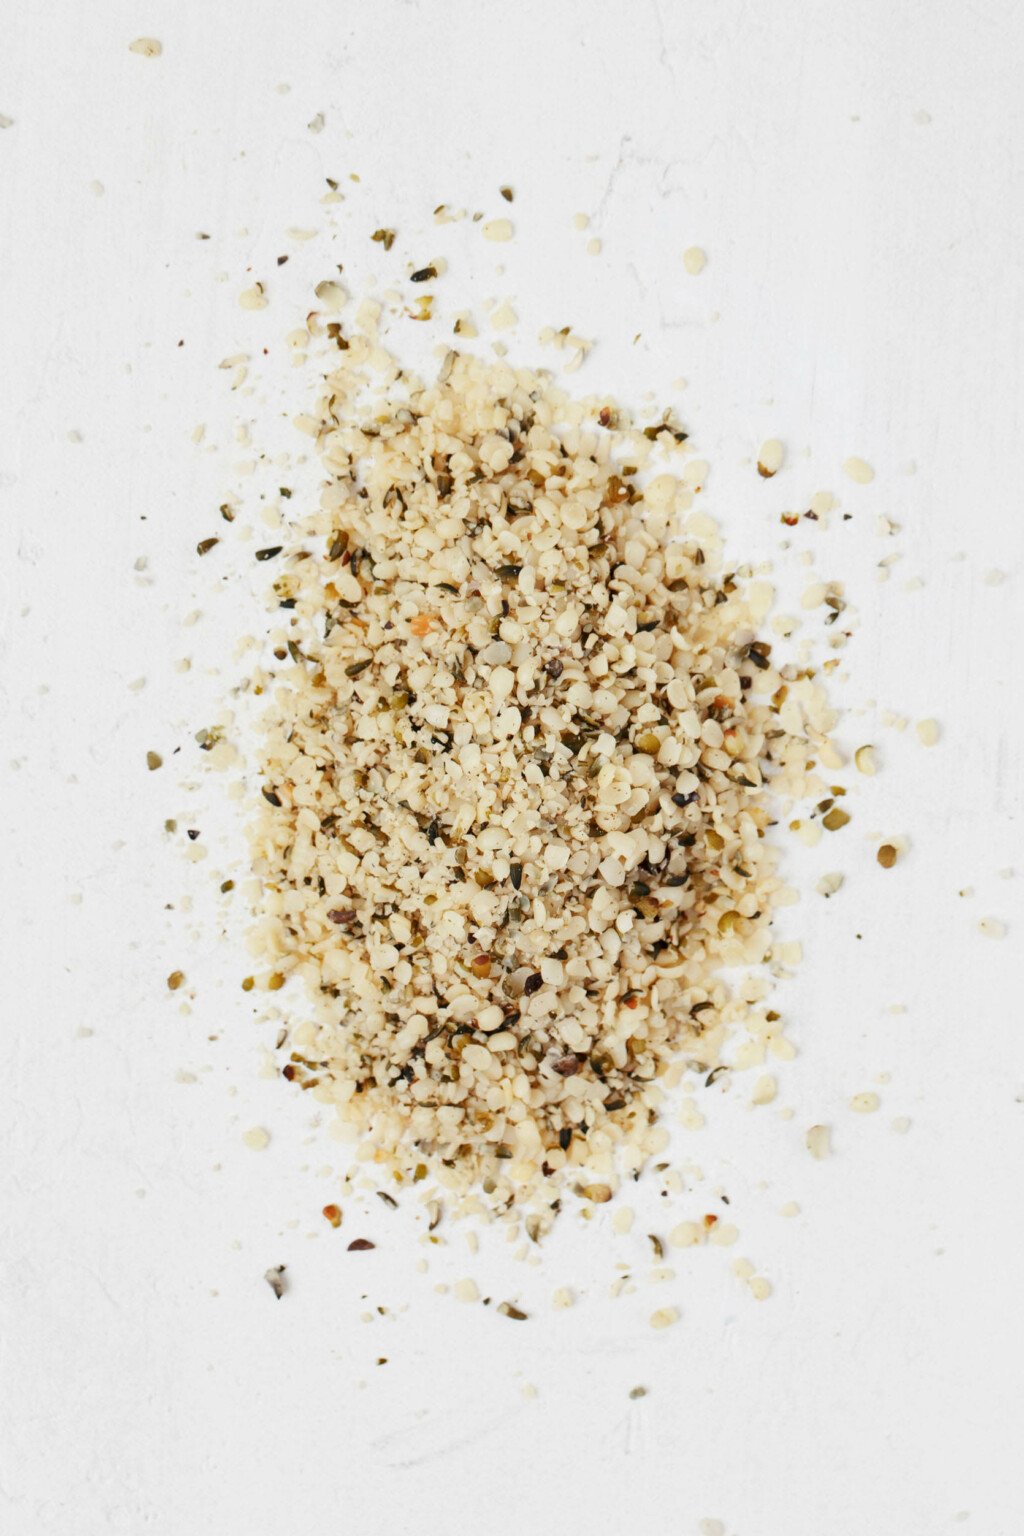 An image of shelled hemp seeds, resting on a white surface.